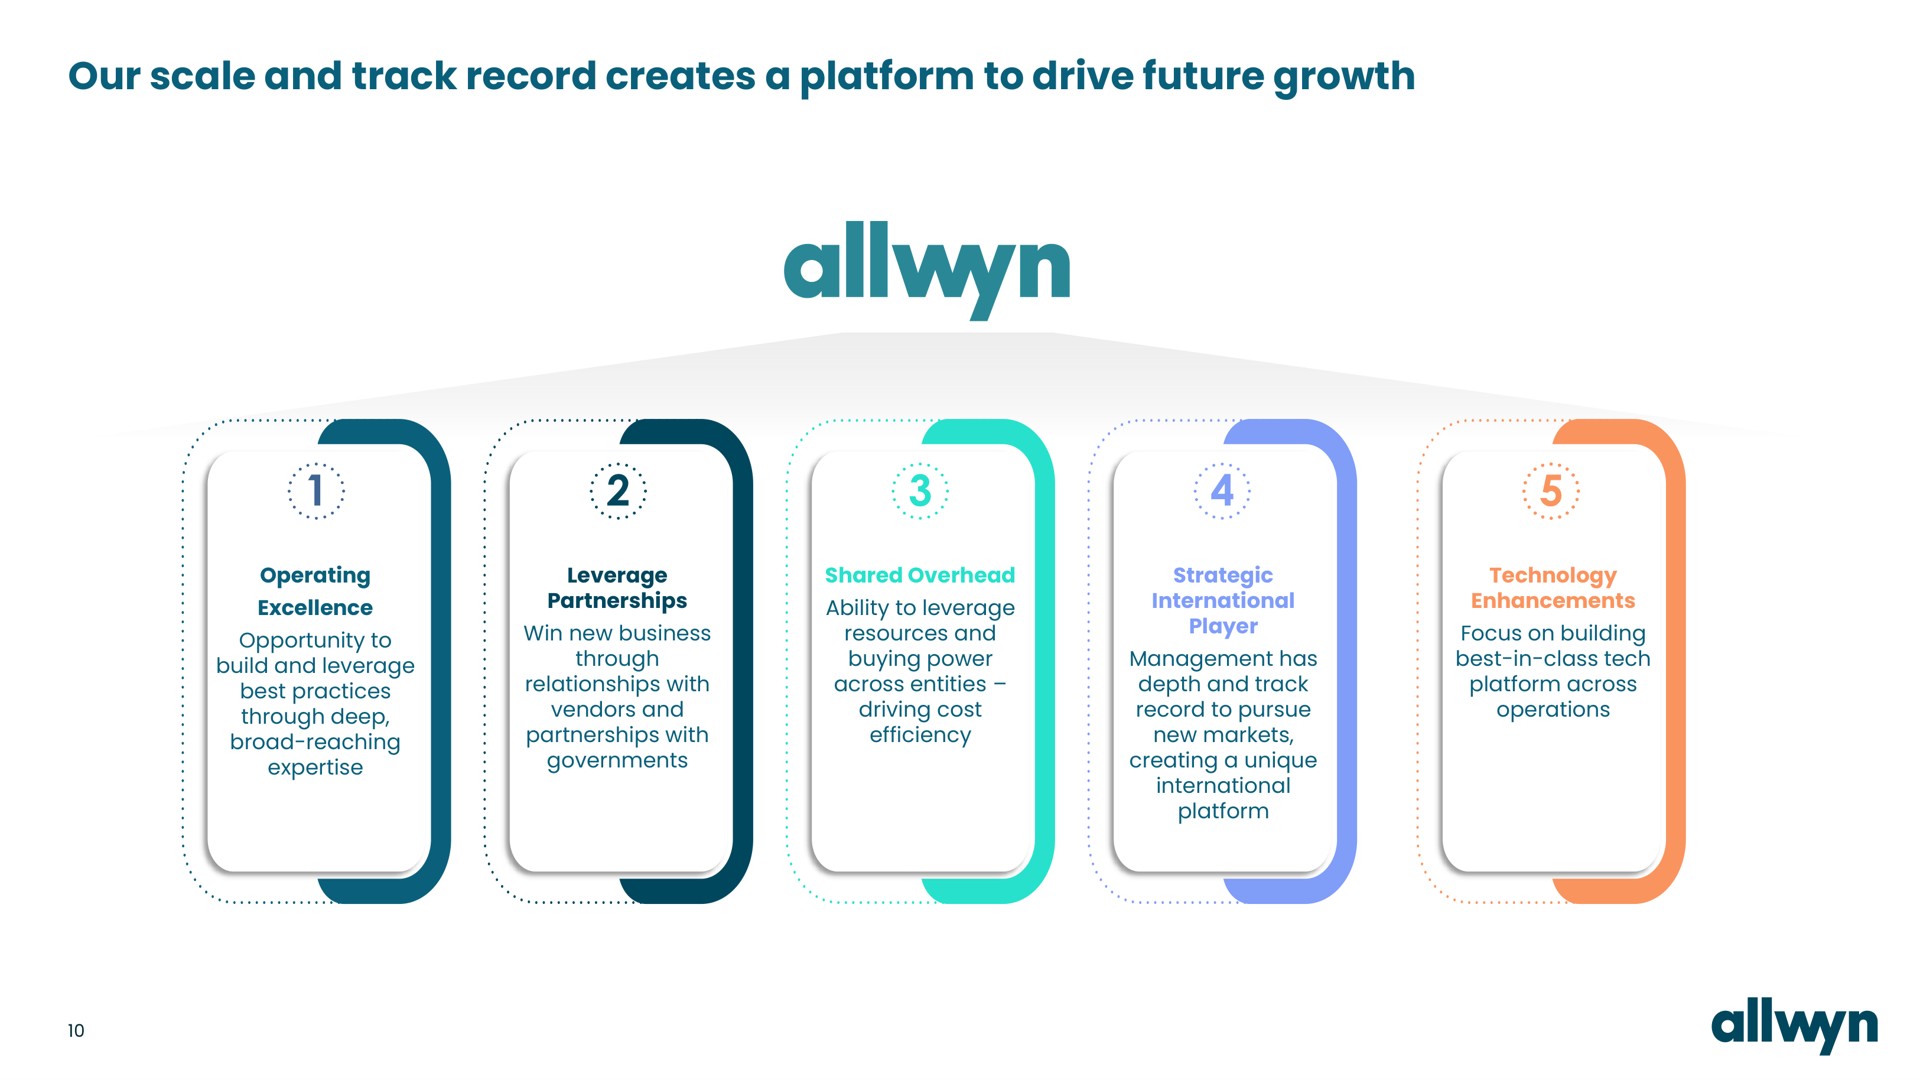 our scale and track record creates a platform to drive future growth | Allwyn